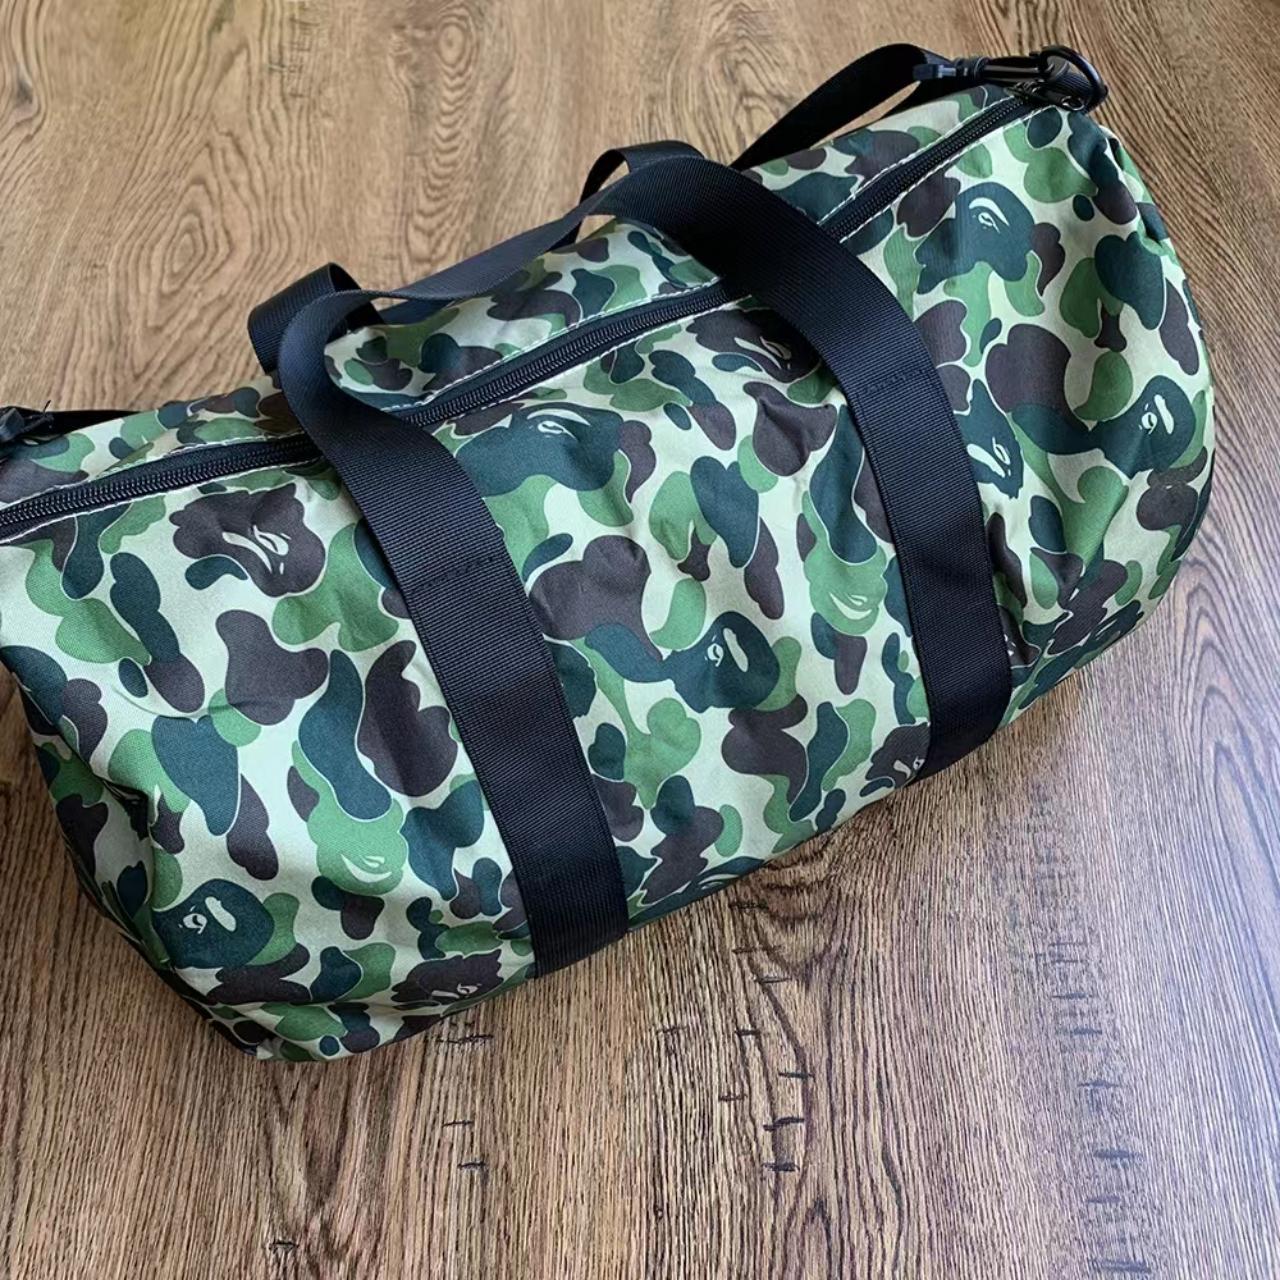 Supreme Duffle Bag “Red” FW17 Bought this from - Depop